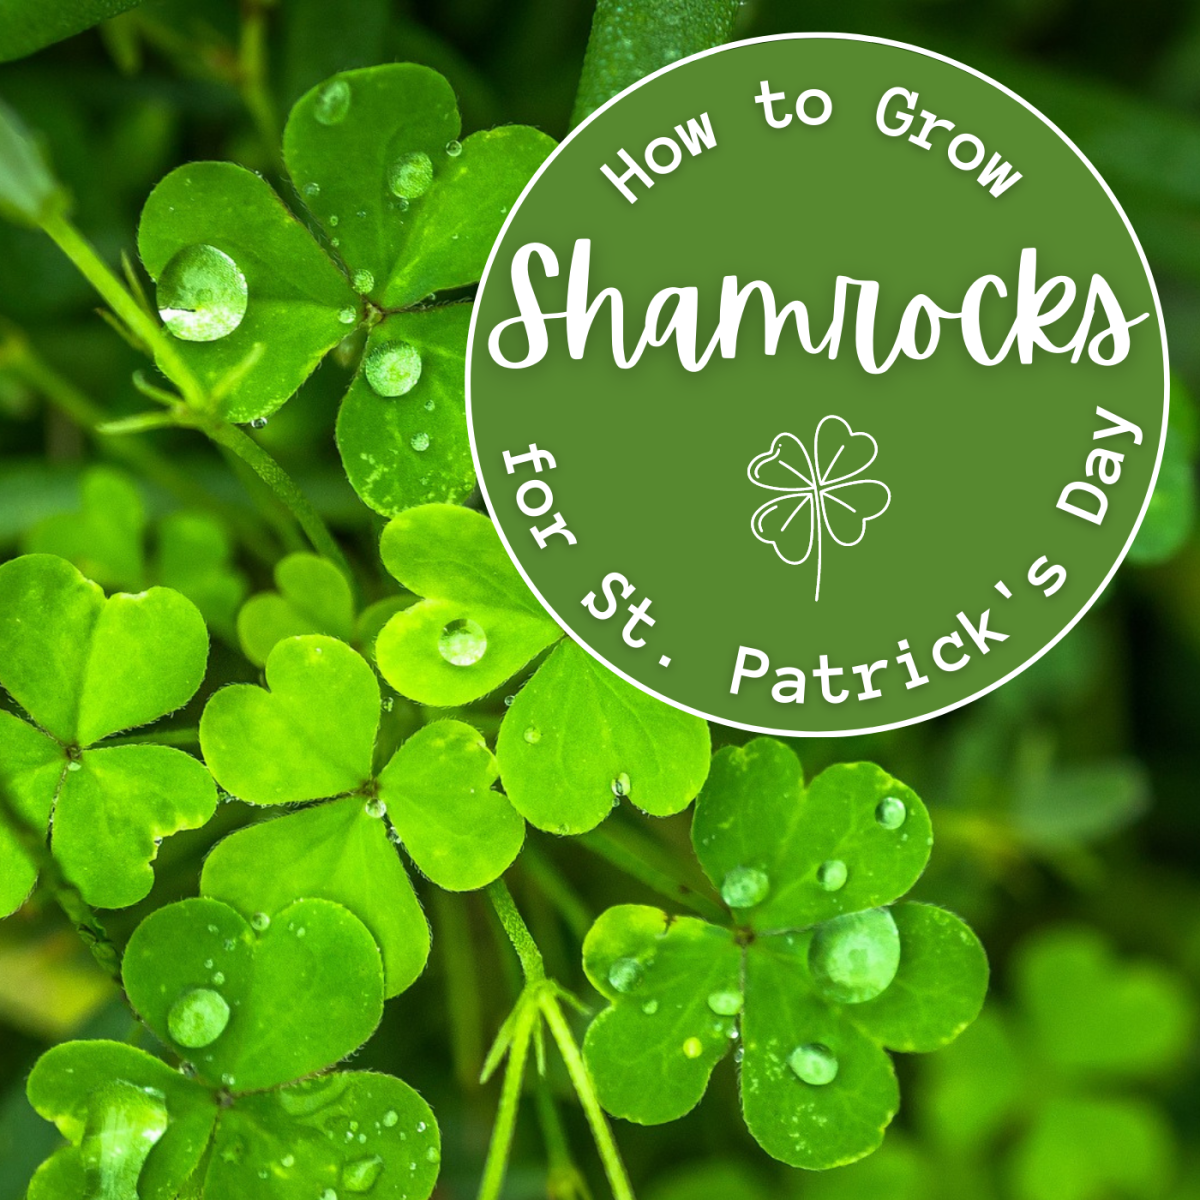 Growing Shamrocks for St. Patrick's Day isn't all it's cracked up to be!